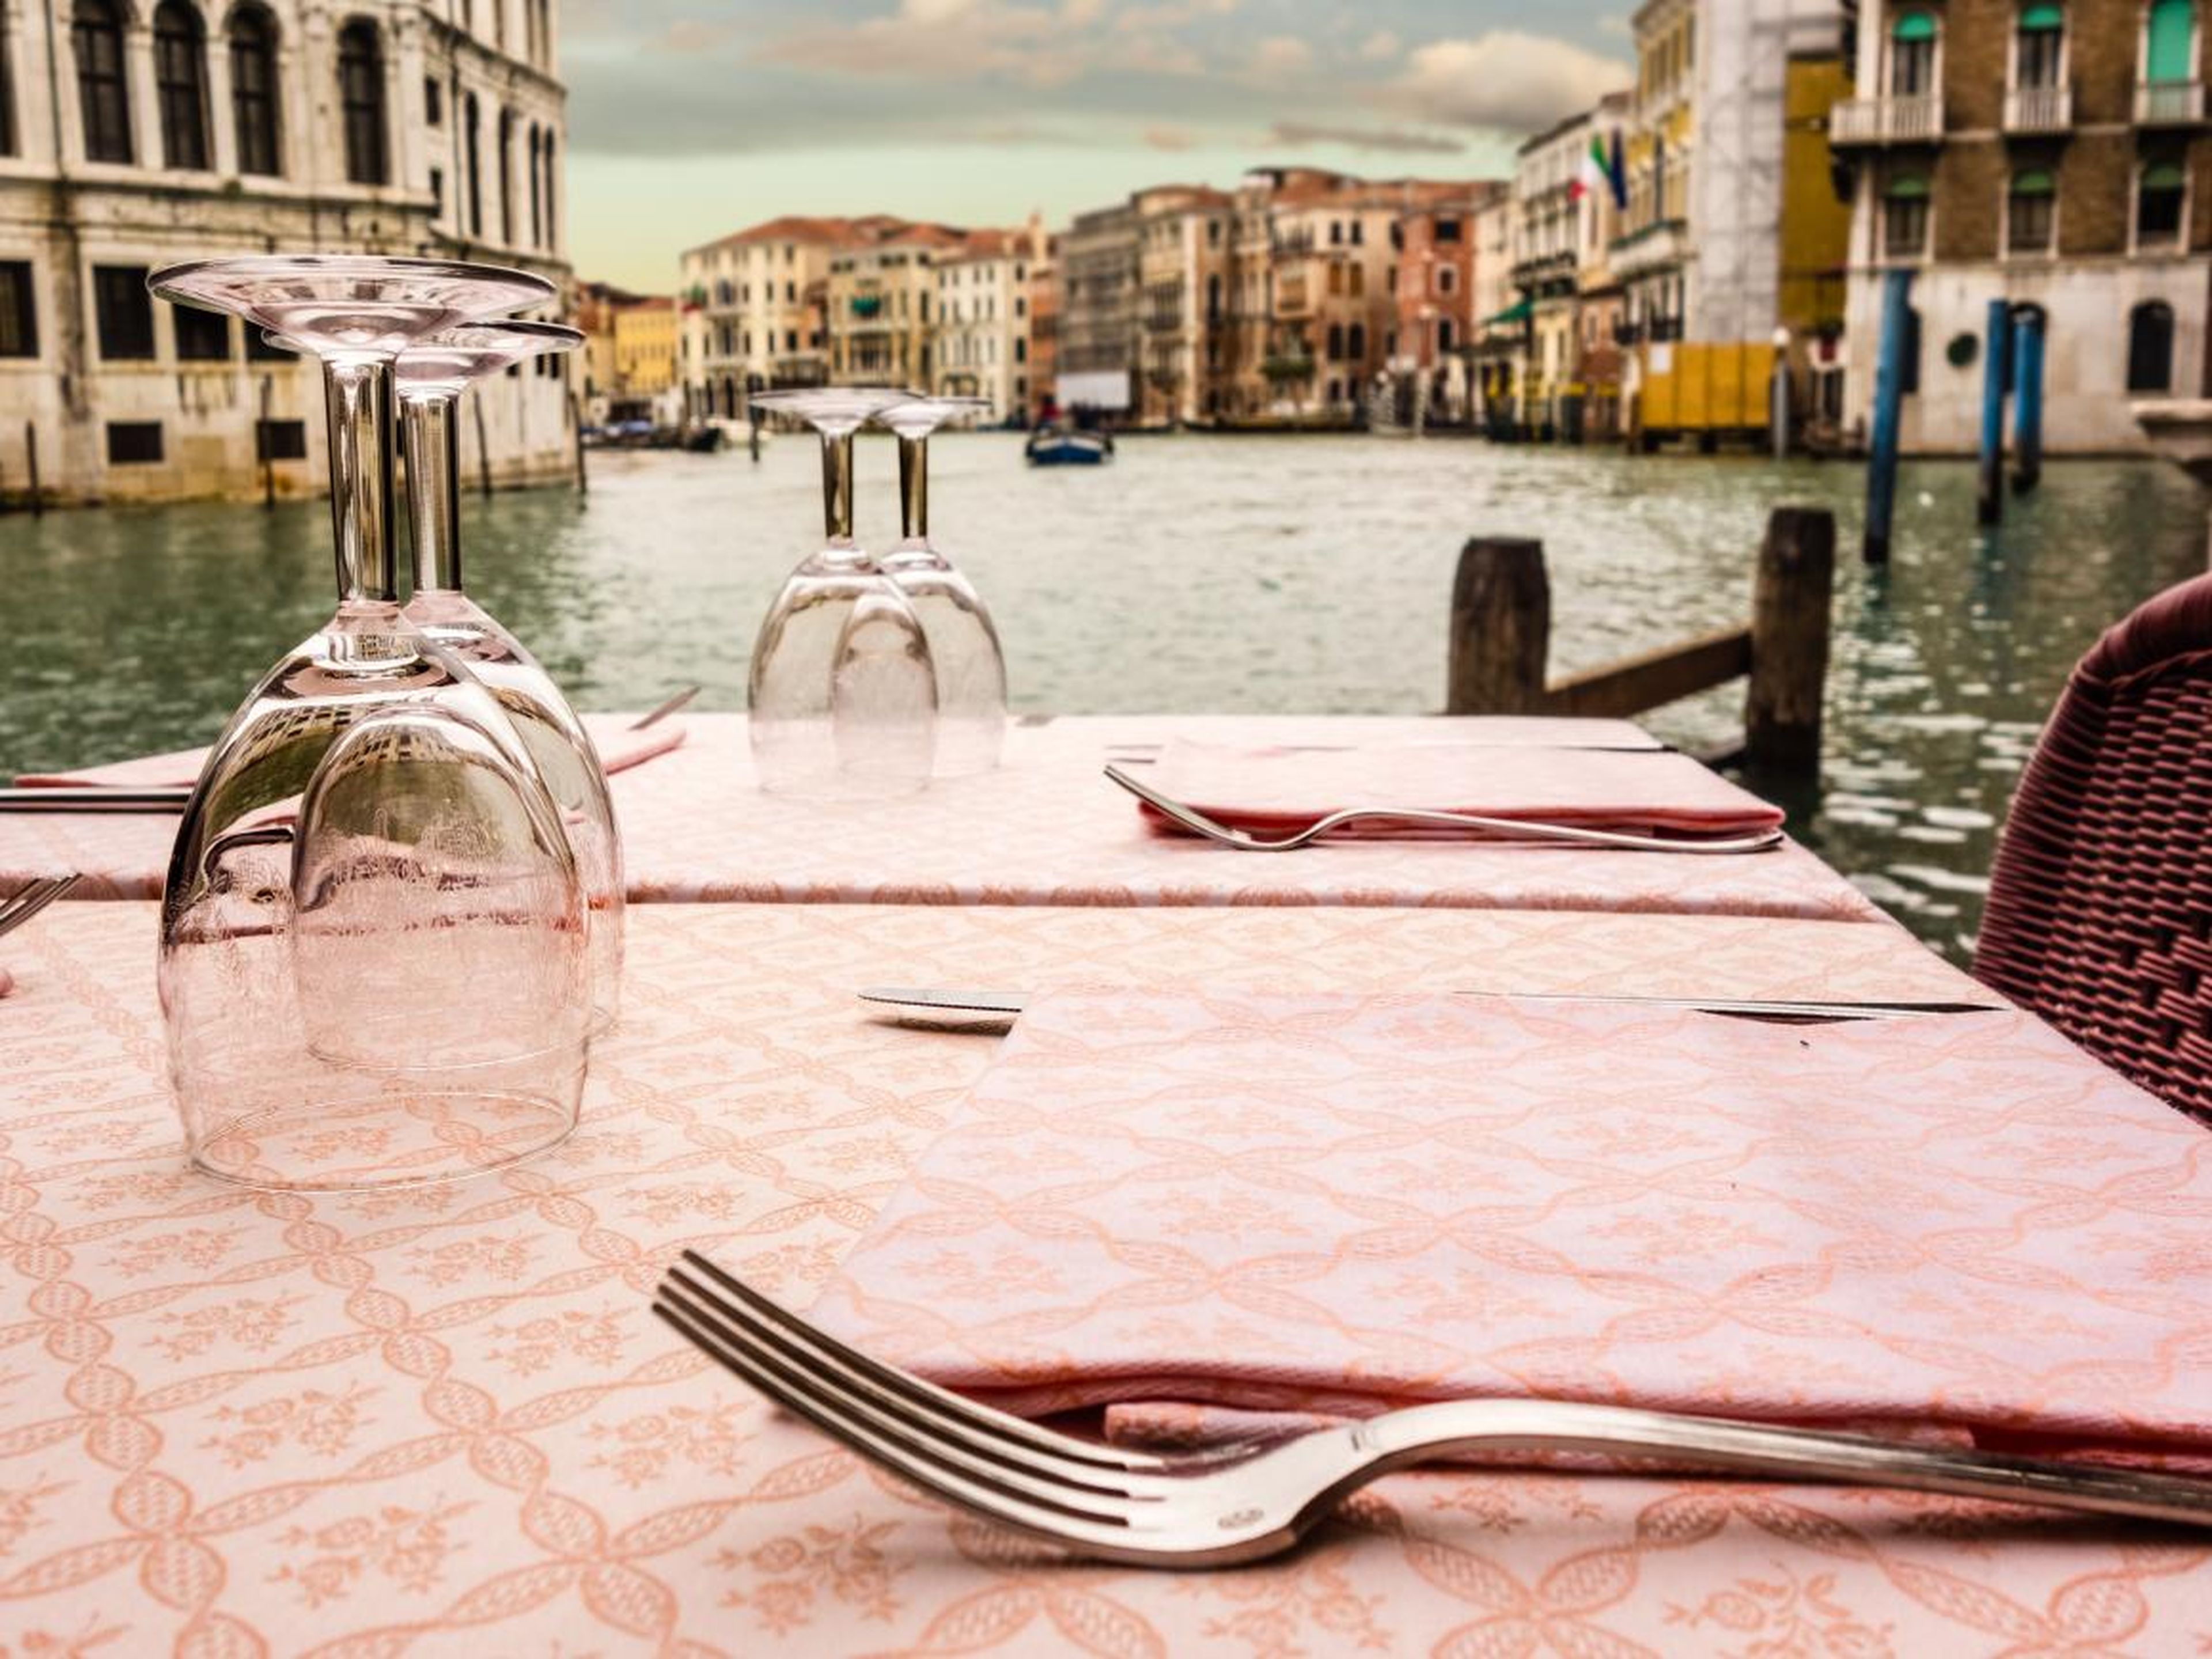 And while it shouldn't be a surprise that a tourist hotspot such as Venice would be expensive, the city has made headlines recently for some truly outrageous prices in its restaurants.